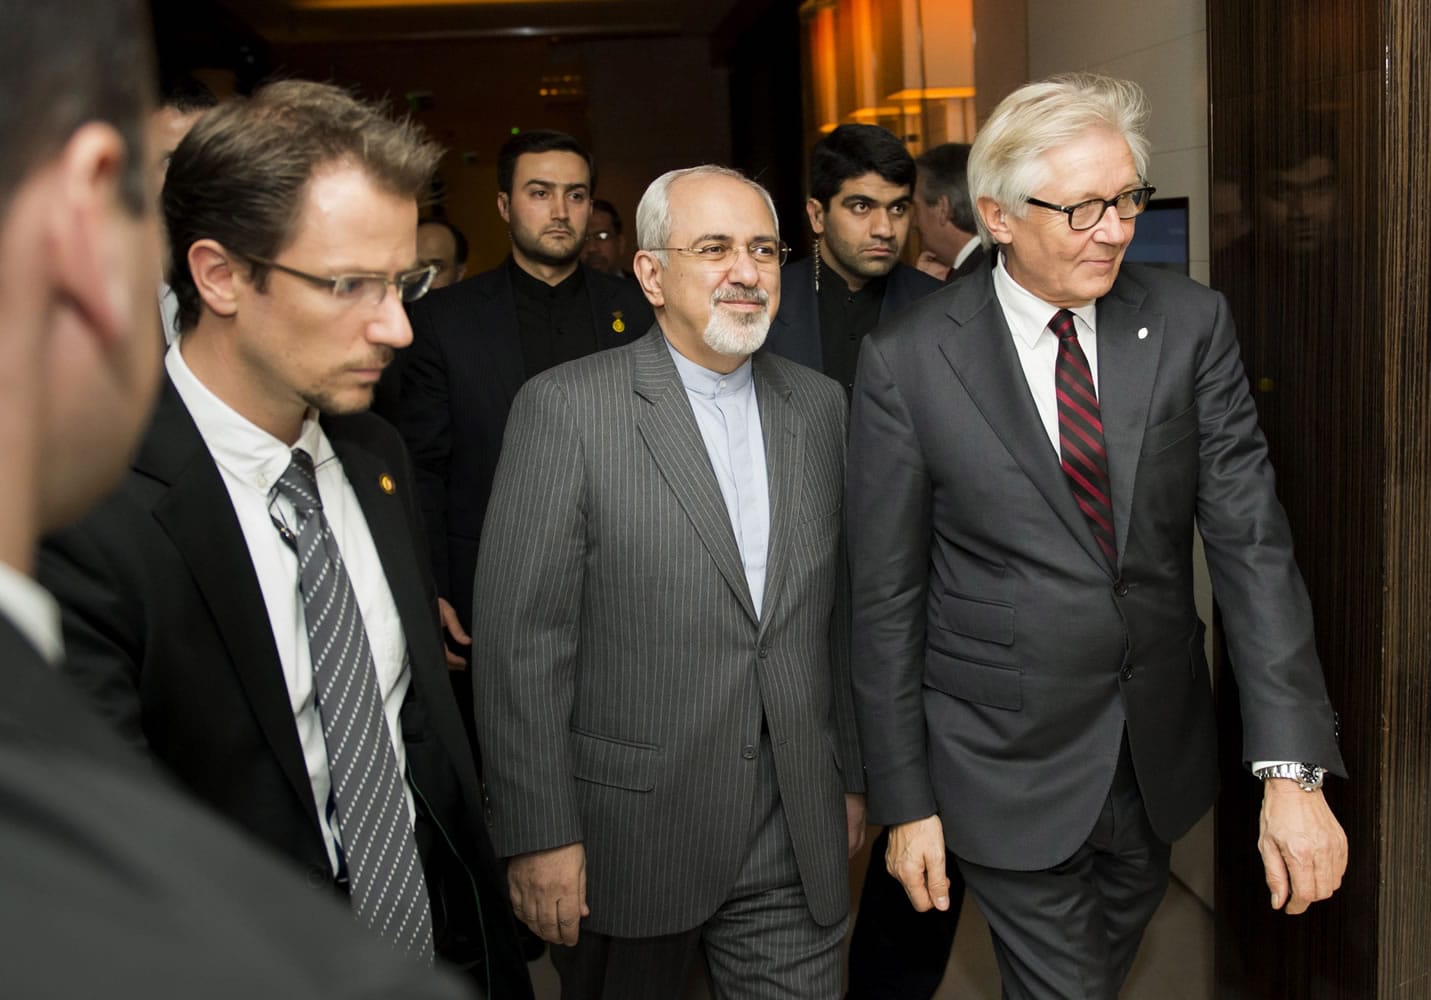 Iranian Foreign Minister Mohammad Javad Zarif, center, makes his way to a meeting Saturday, the third day of closed-door nuclear talks in Geneva.